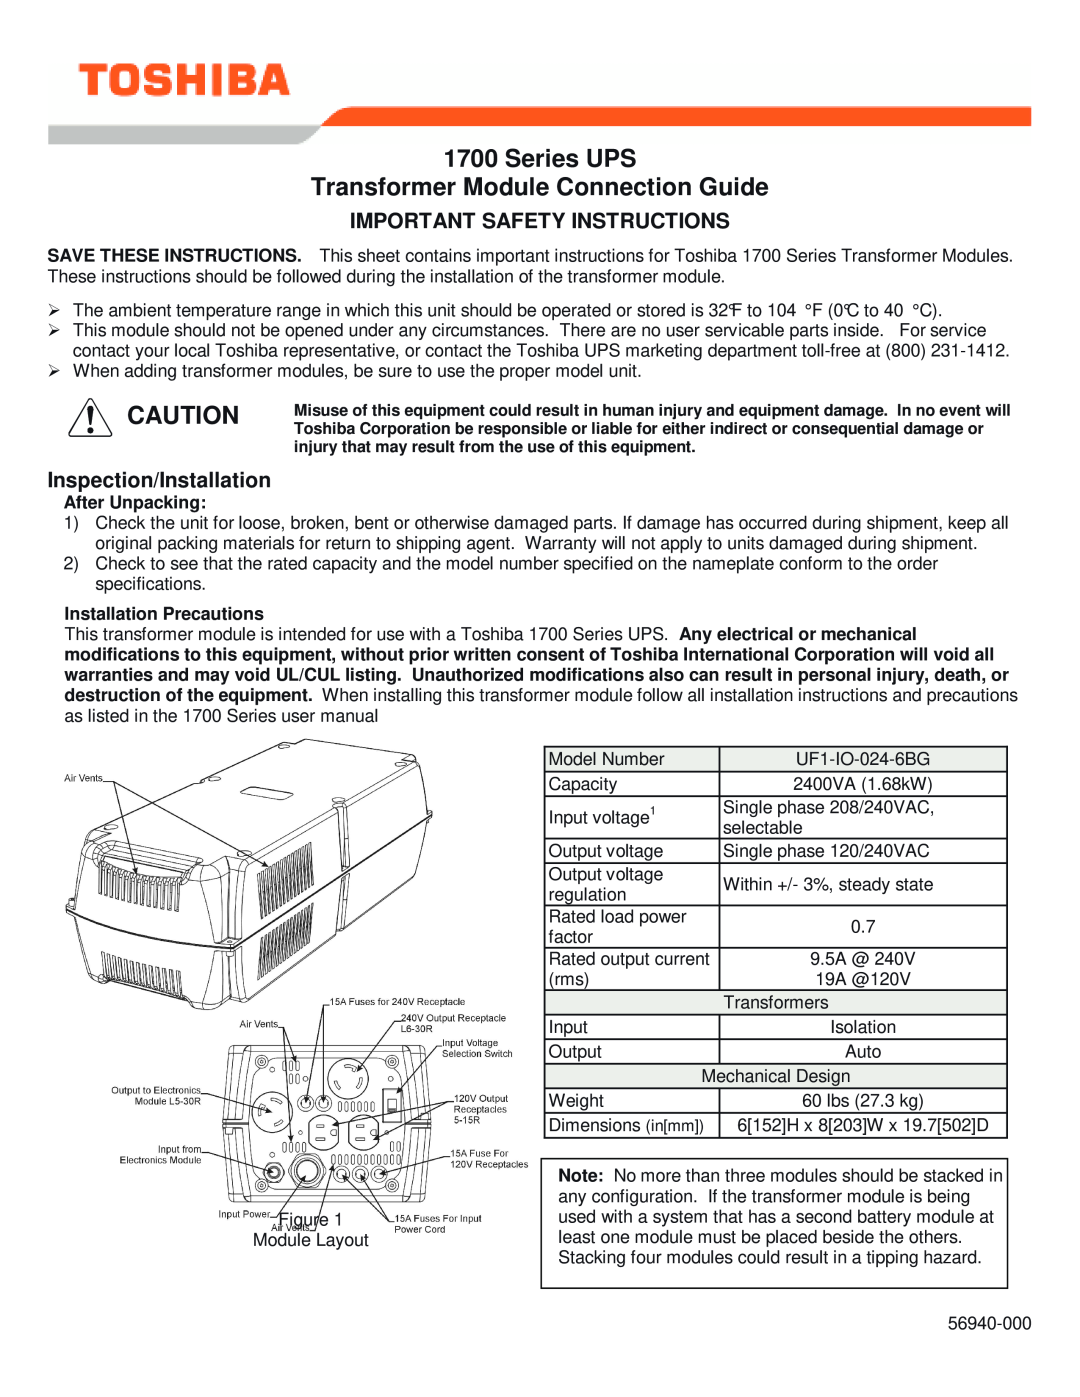 Toshiba 1700 Series important safety instructions Series UPS Transformer Module Connection Guide, Inspection/Installation 